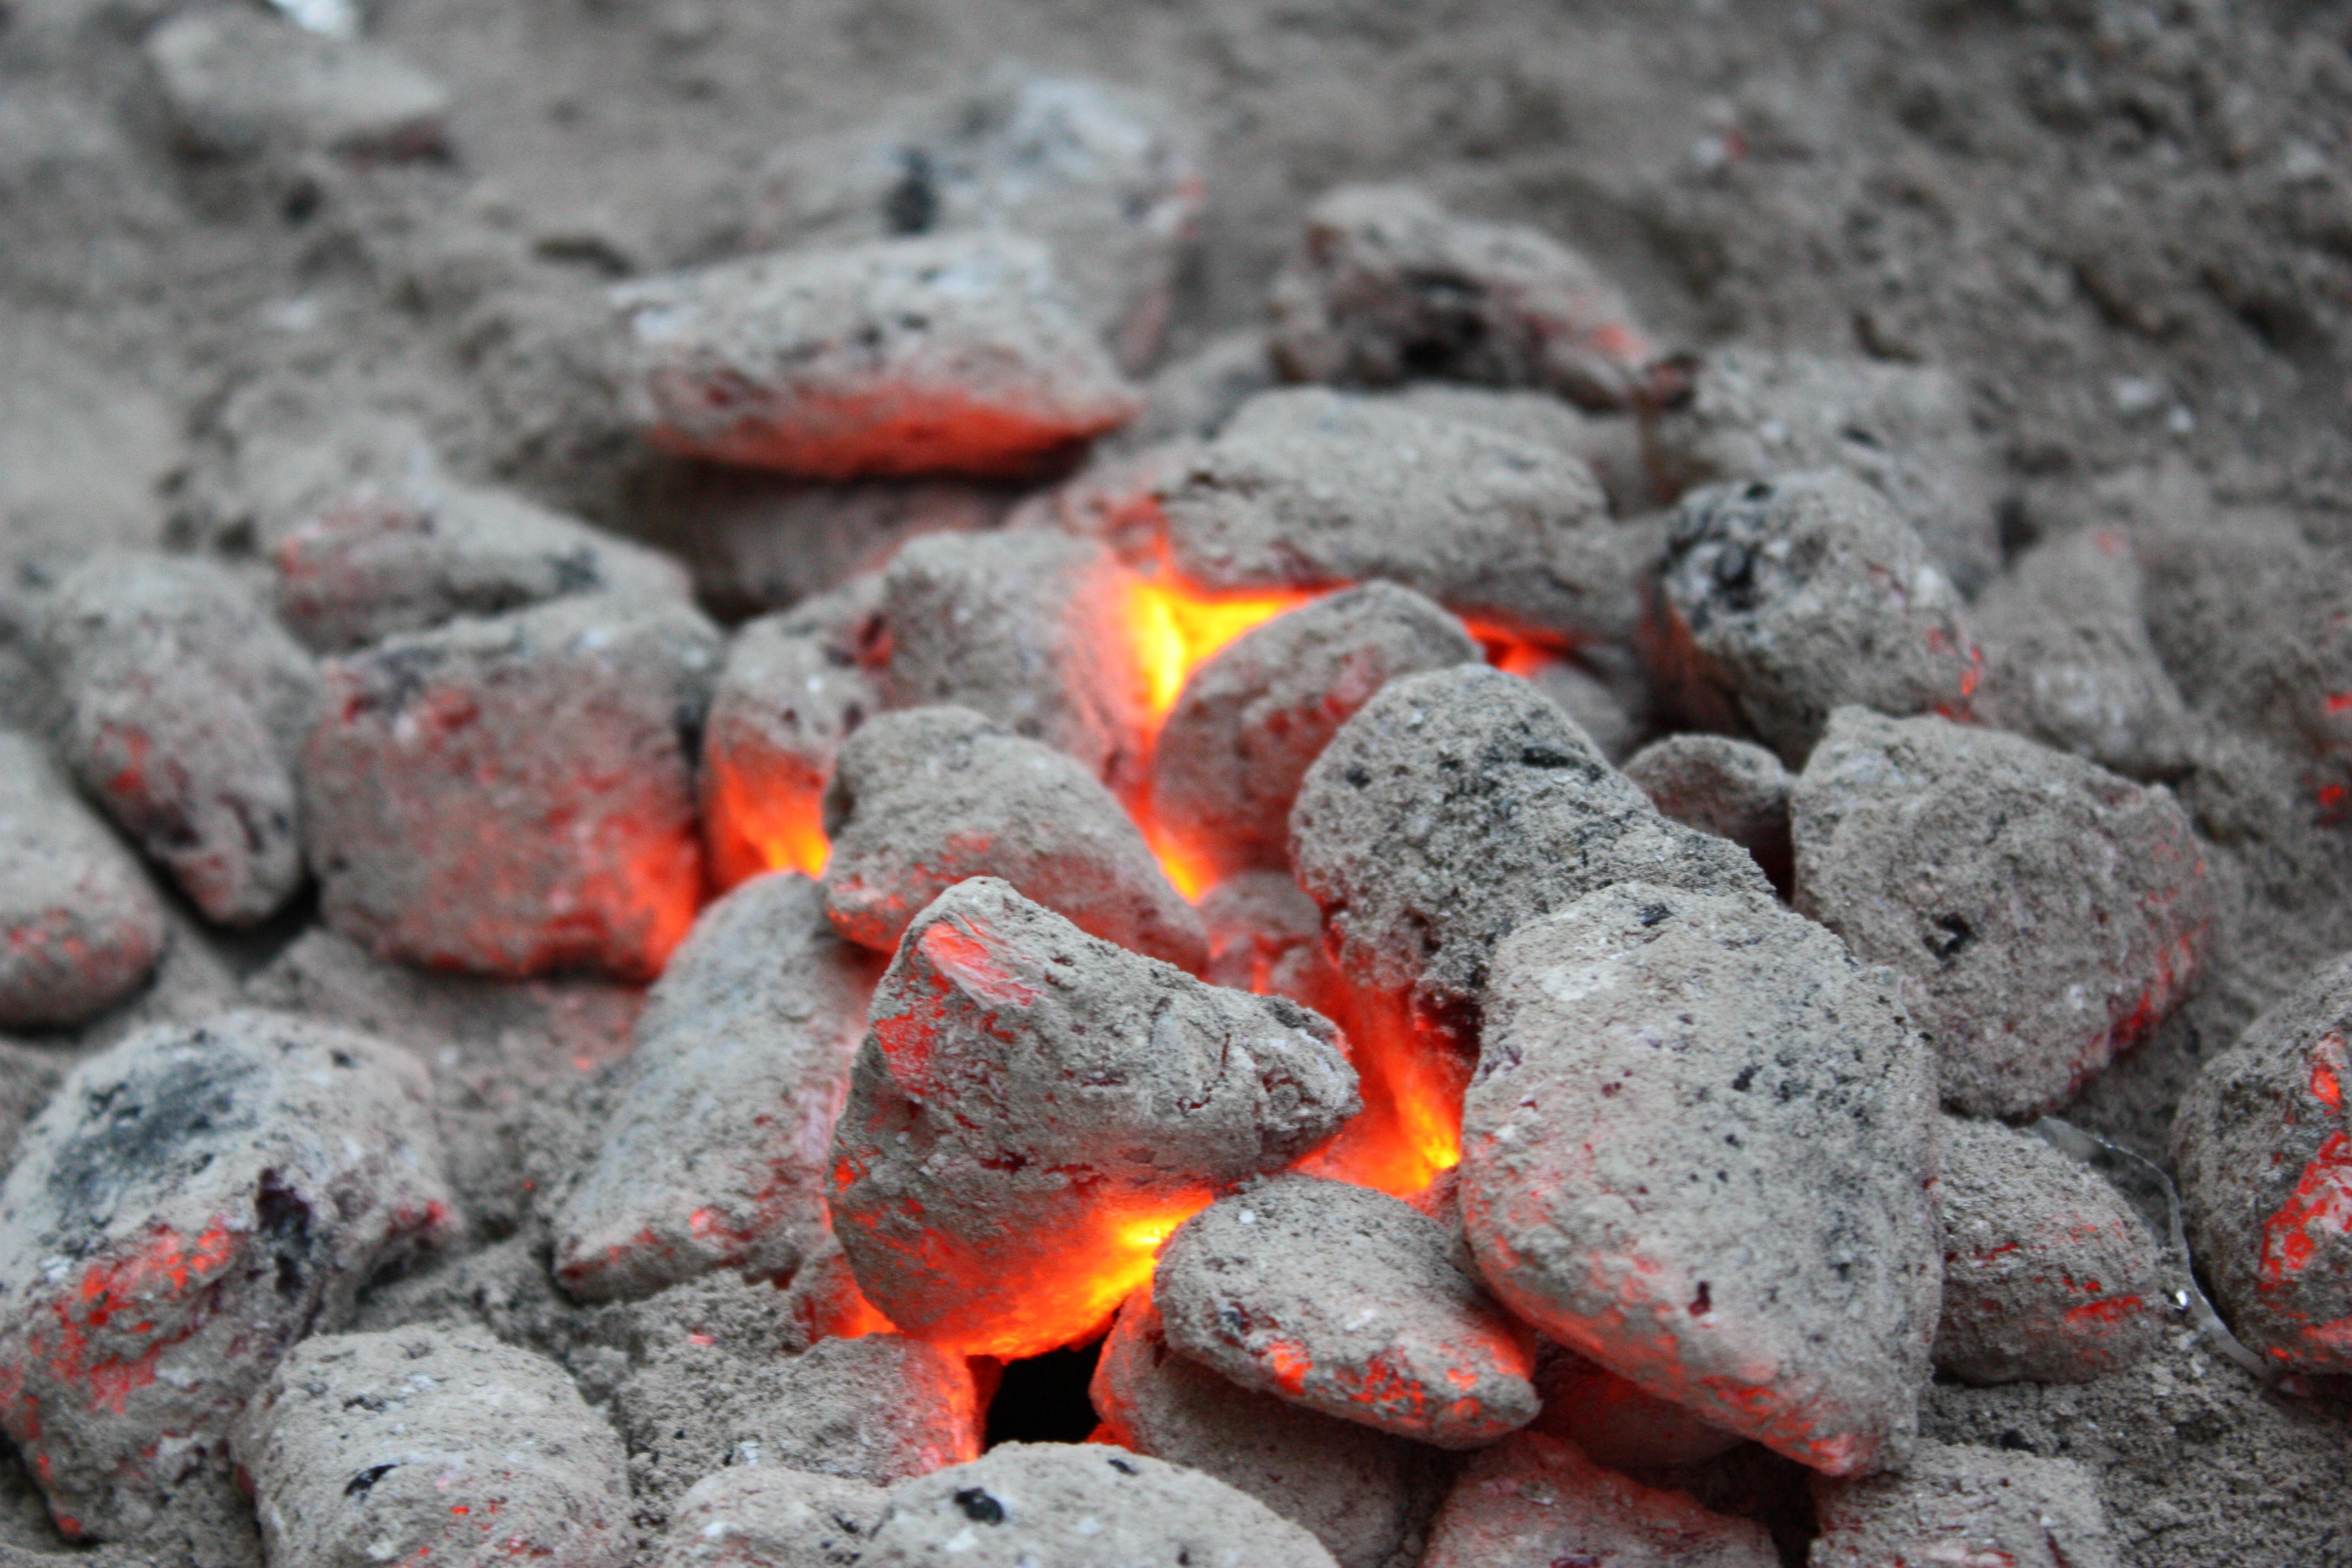 Preparing​ and Igniting‍ the Charcoal